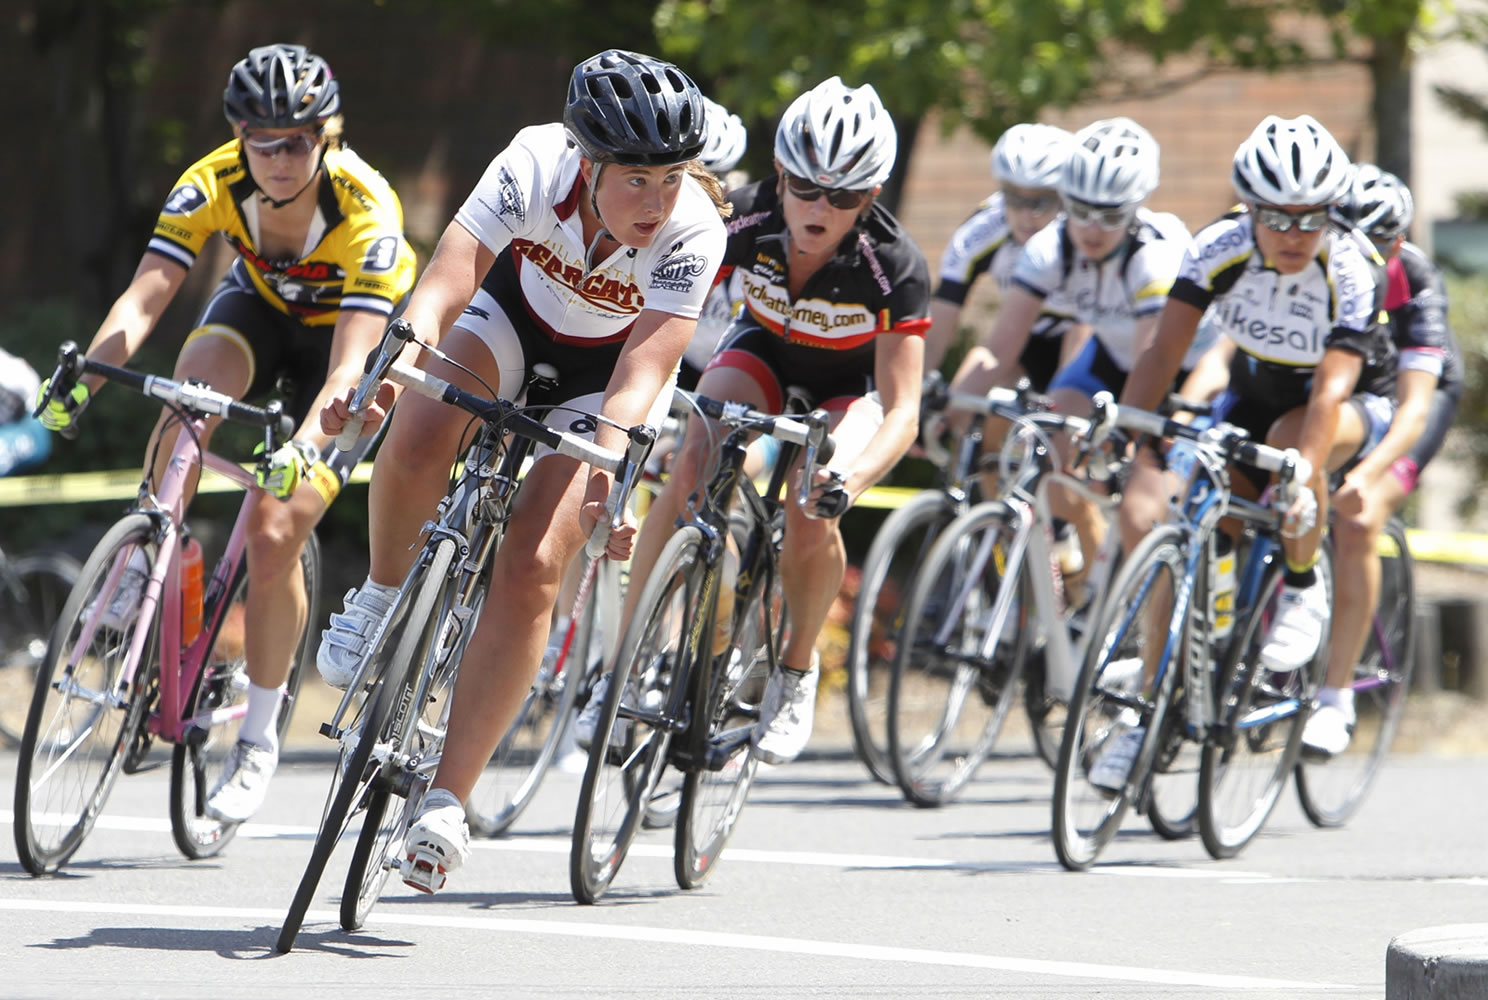 Women in Category 4/5 compete in a 30-minute ride on sunday.